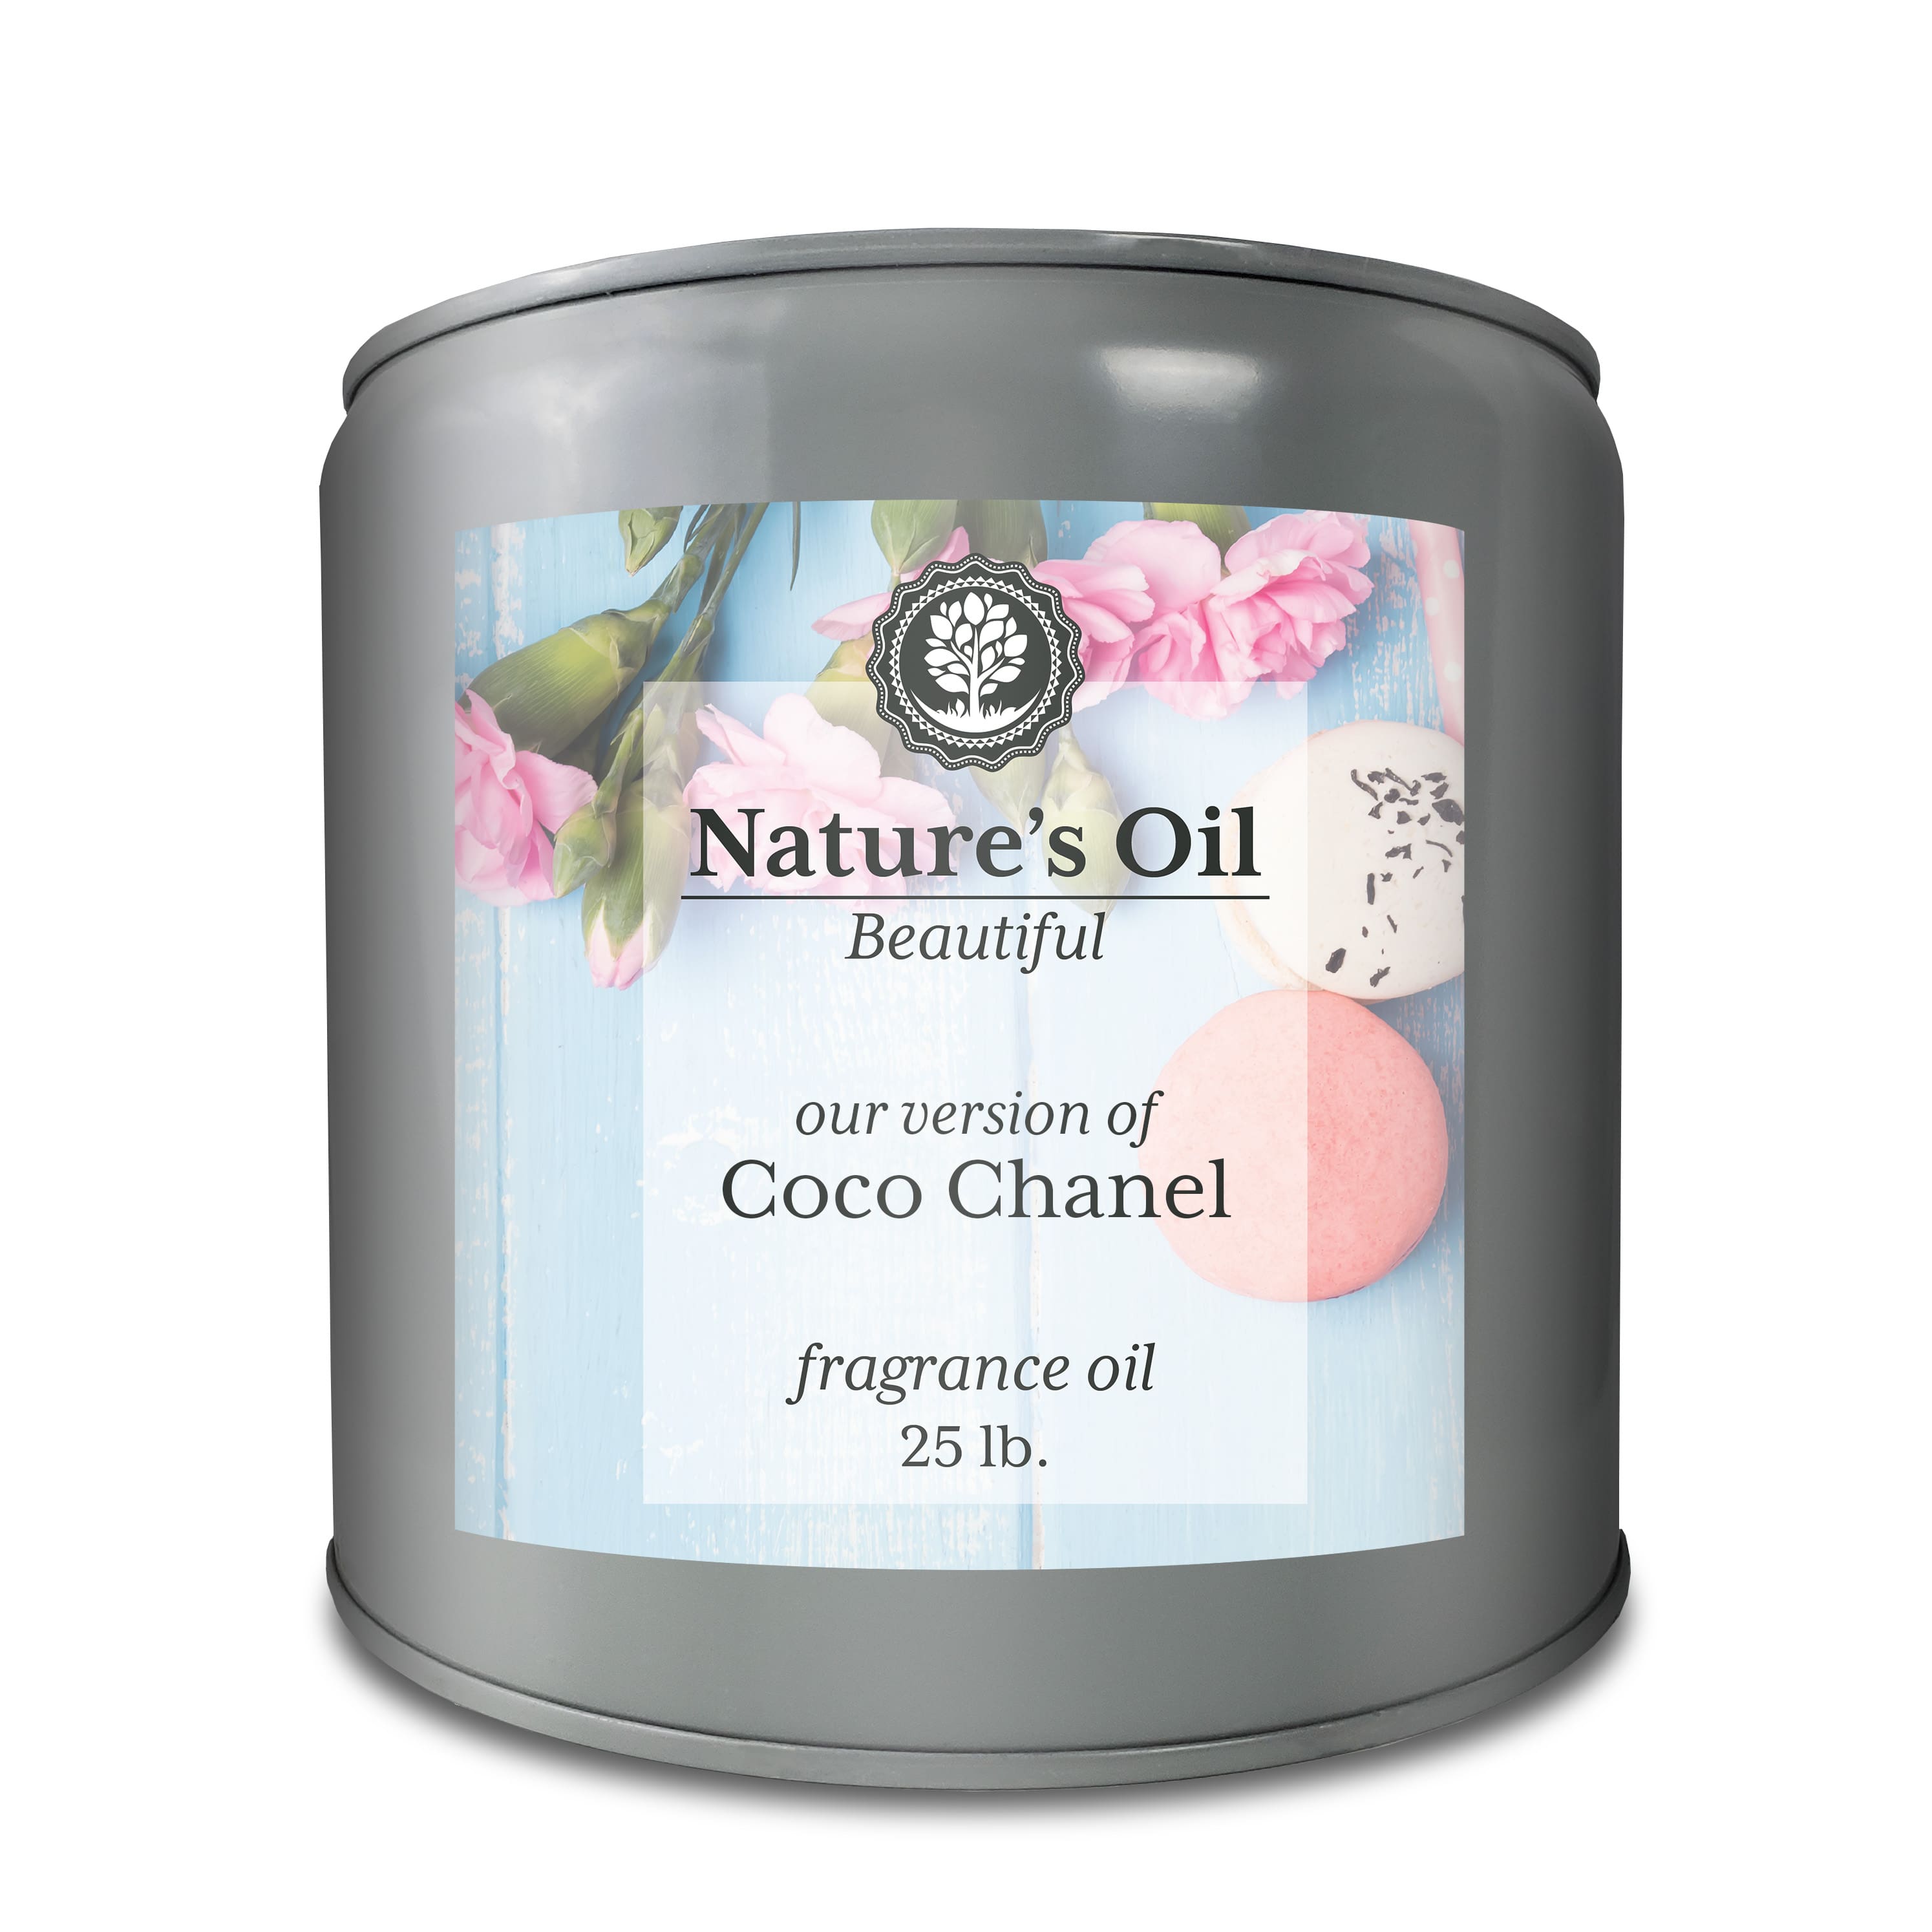 Our Version of Coco Chanel Fragrance Oil